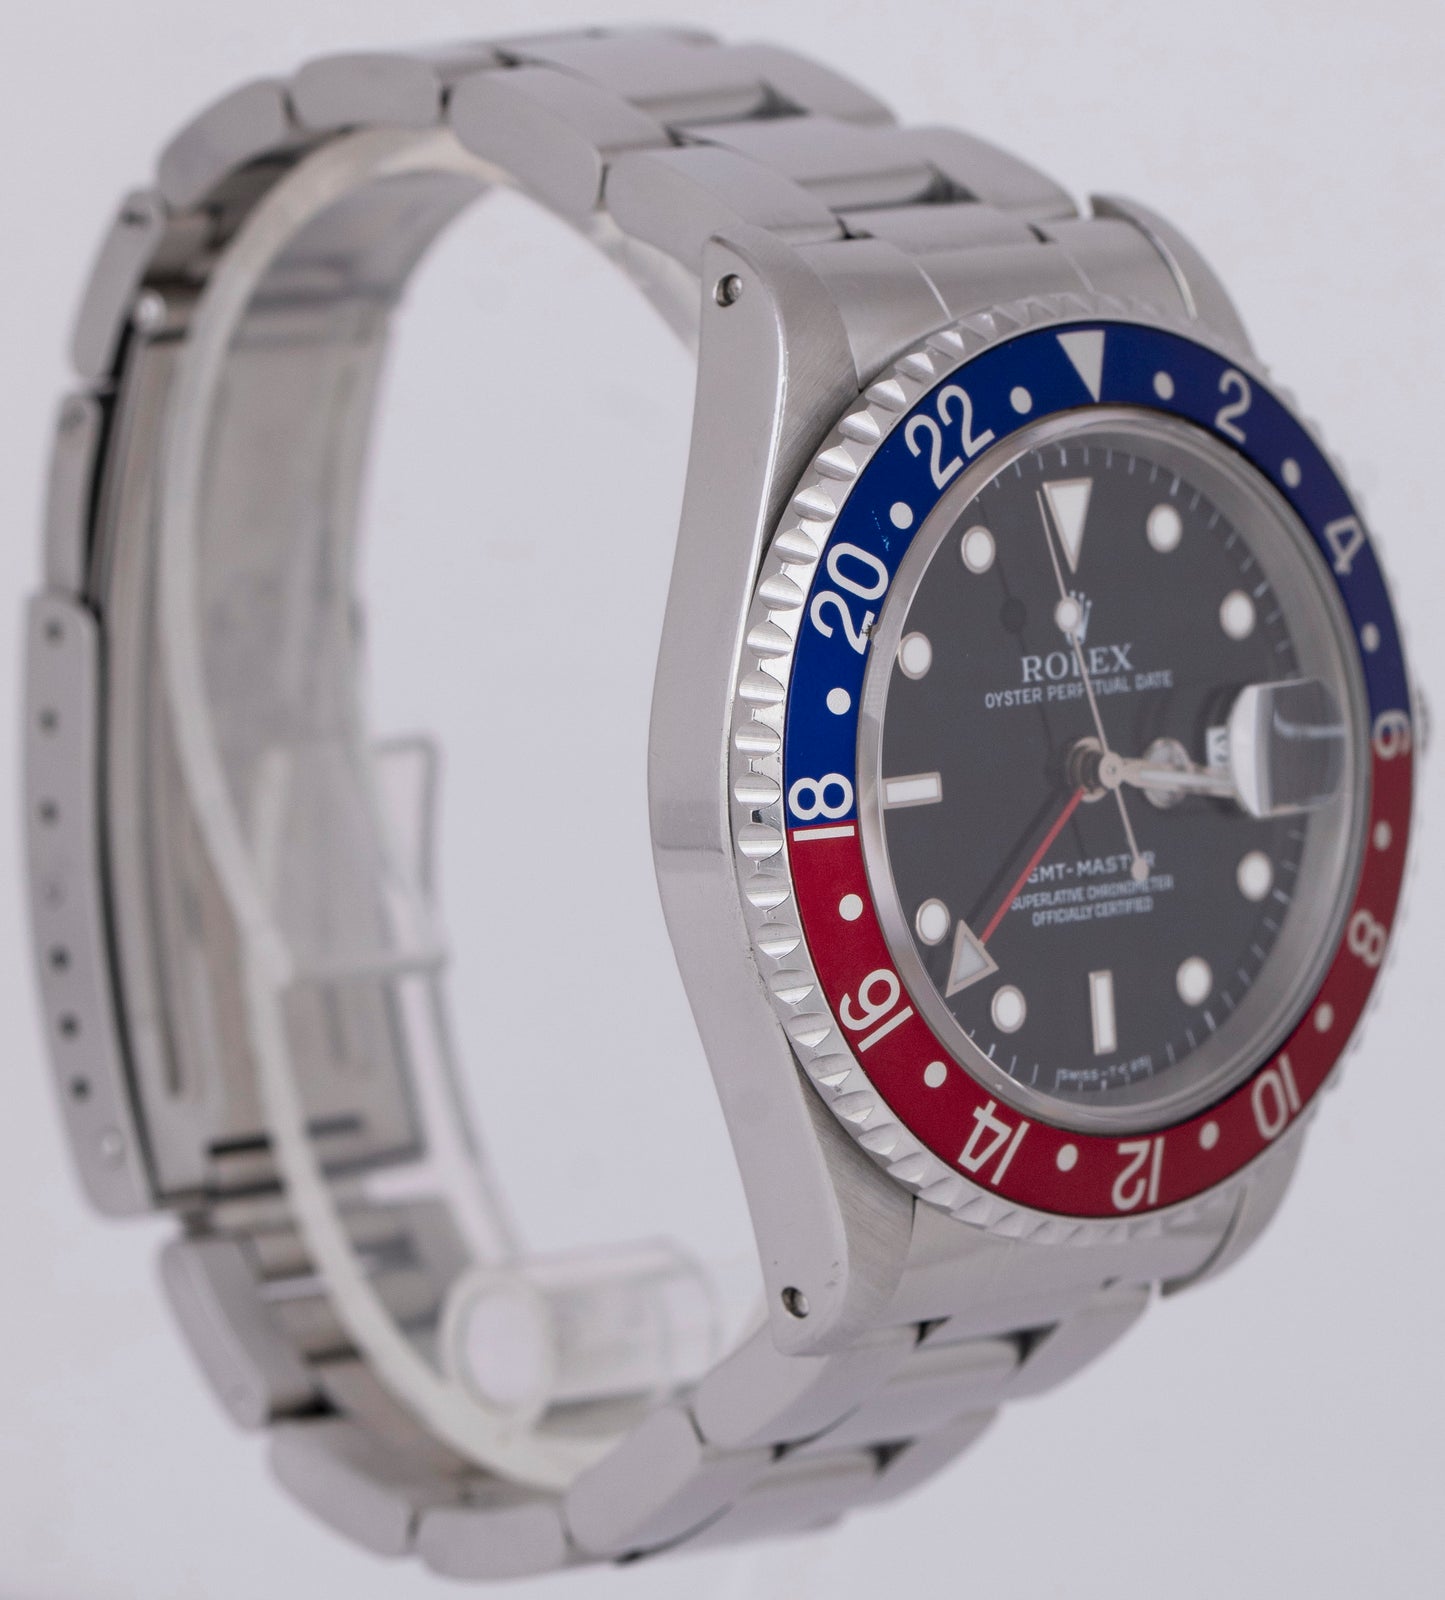 Rolex GMT-Master 40mm Blue Red PEPSI Black Stainless Steel Date Watch 16700